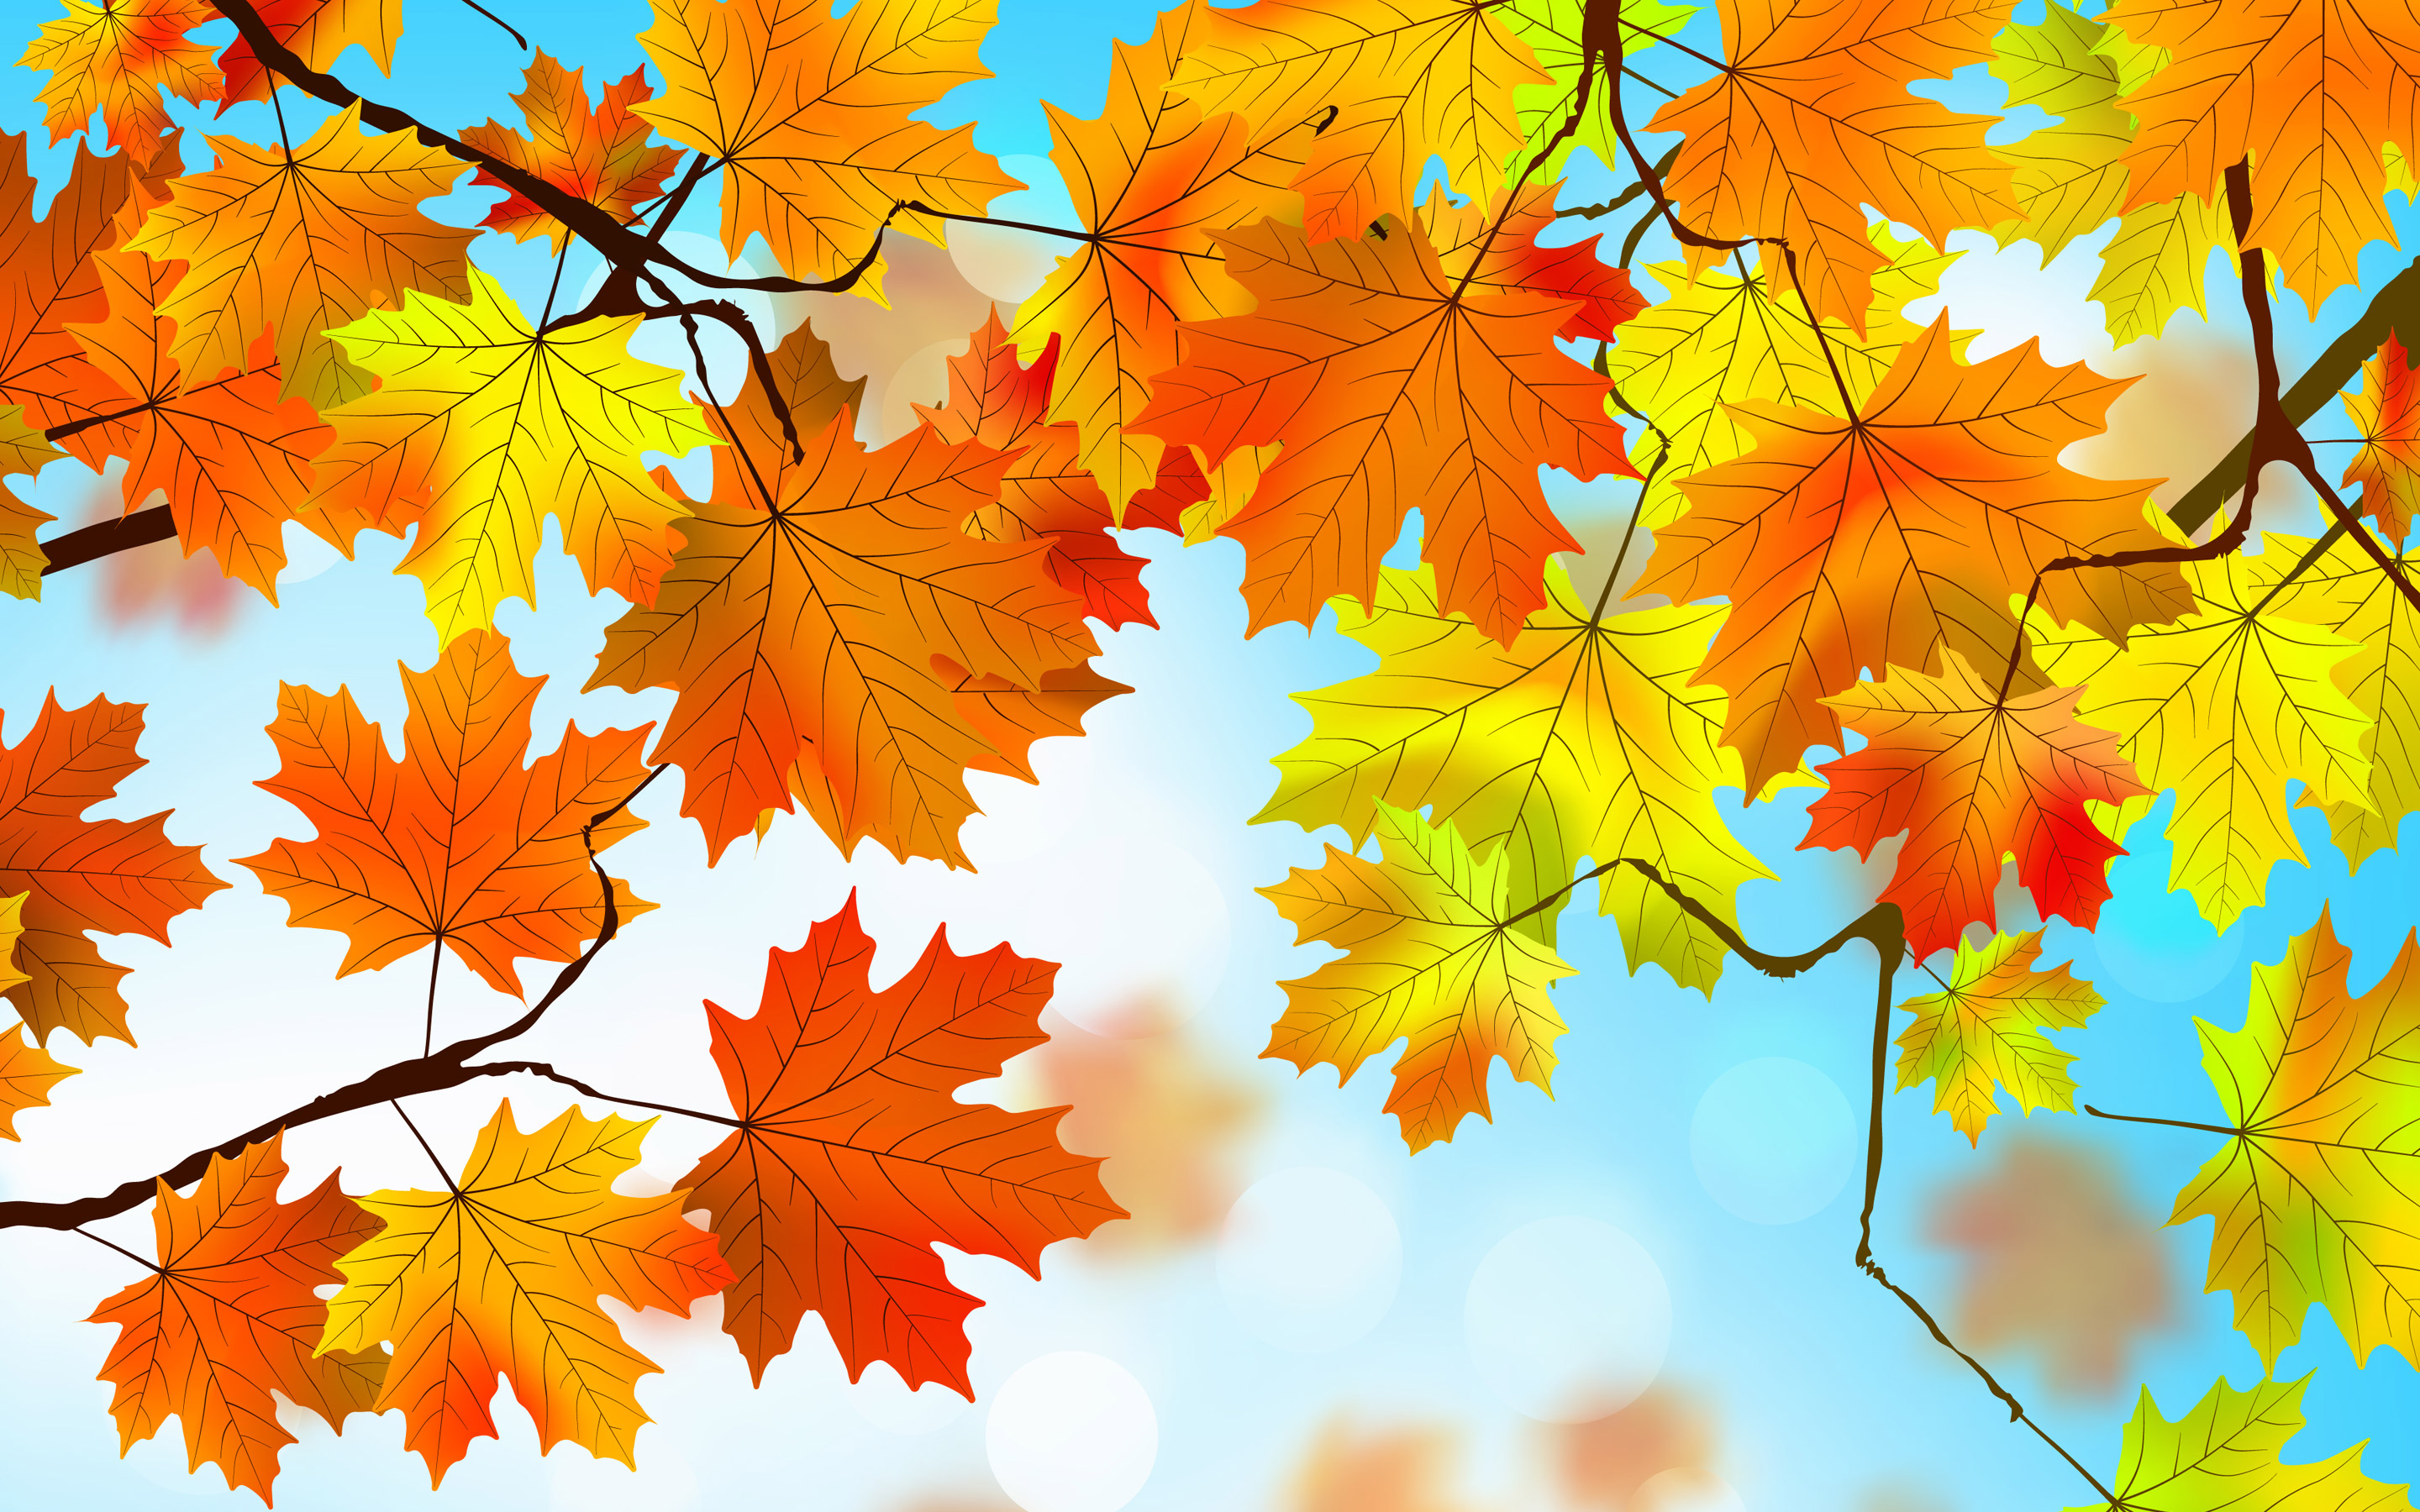 Wallpapers autumn leaves nature on the desktop